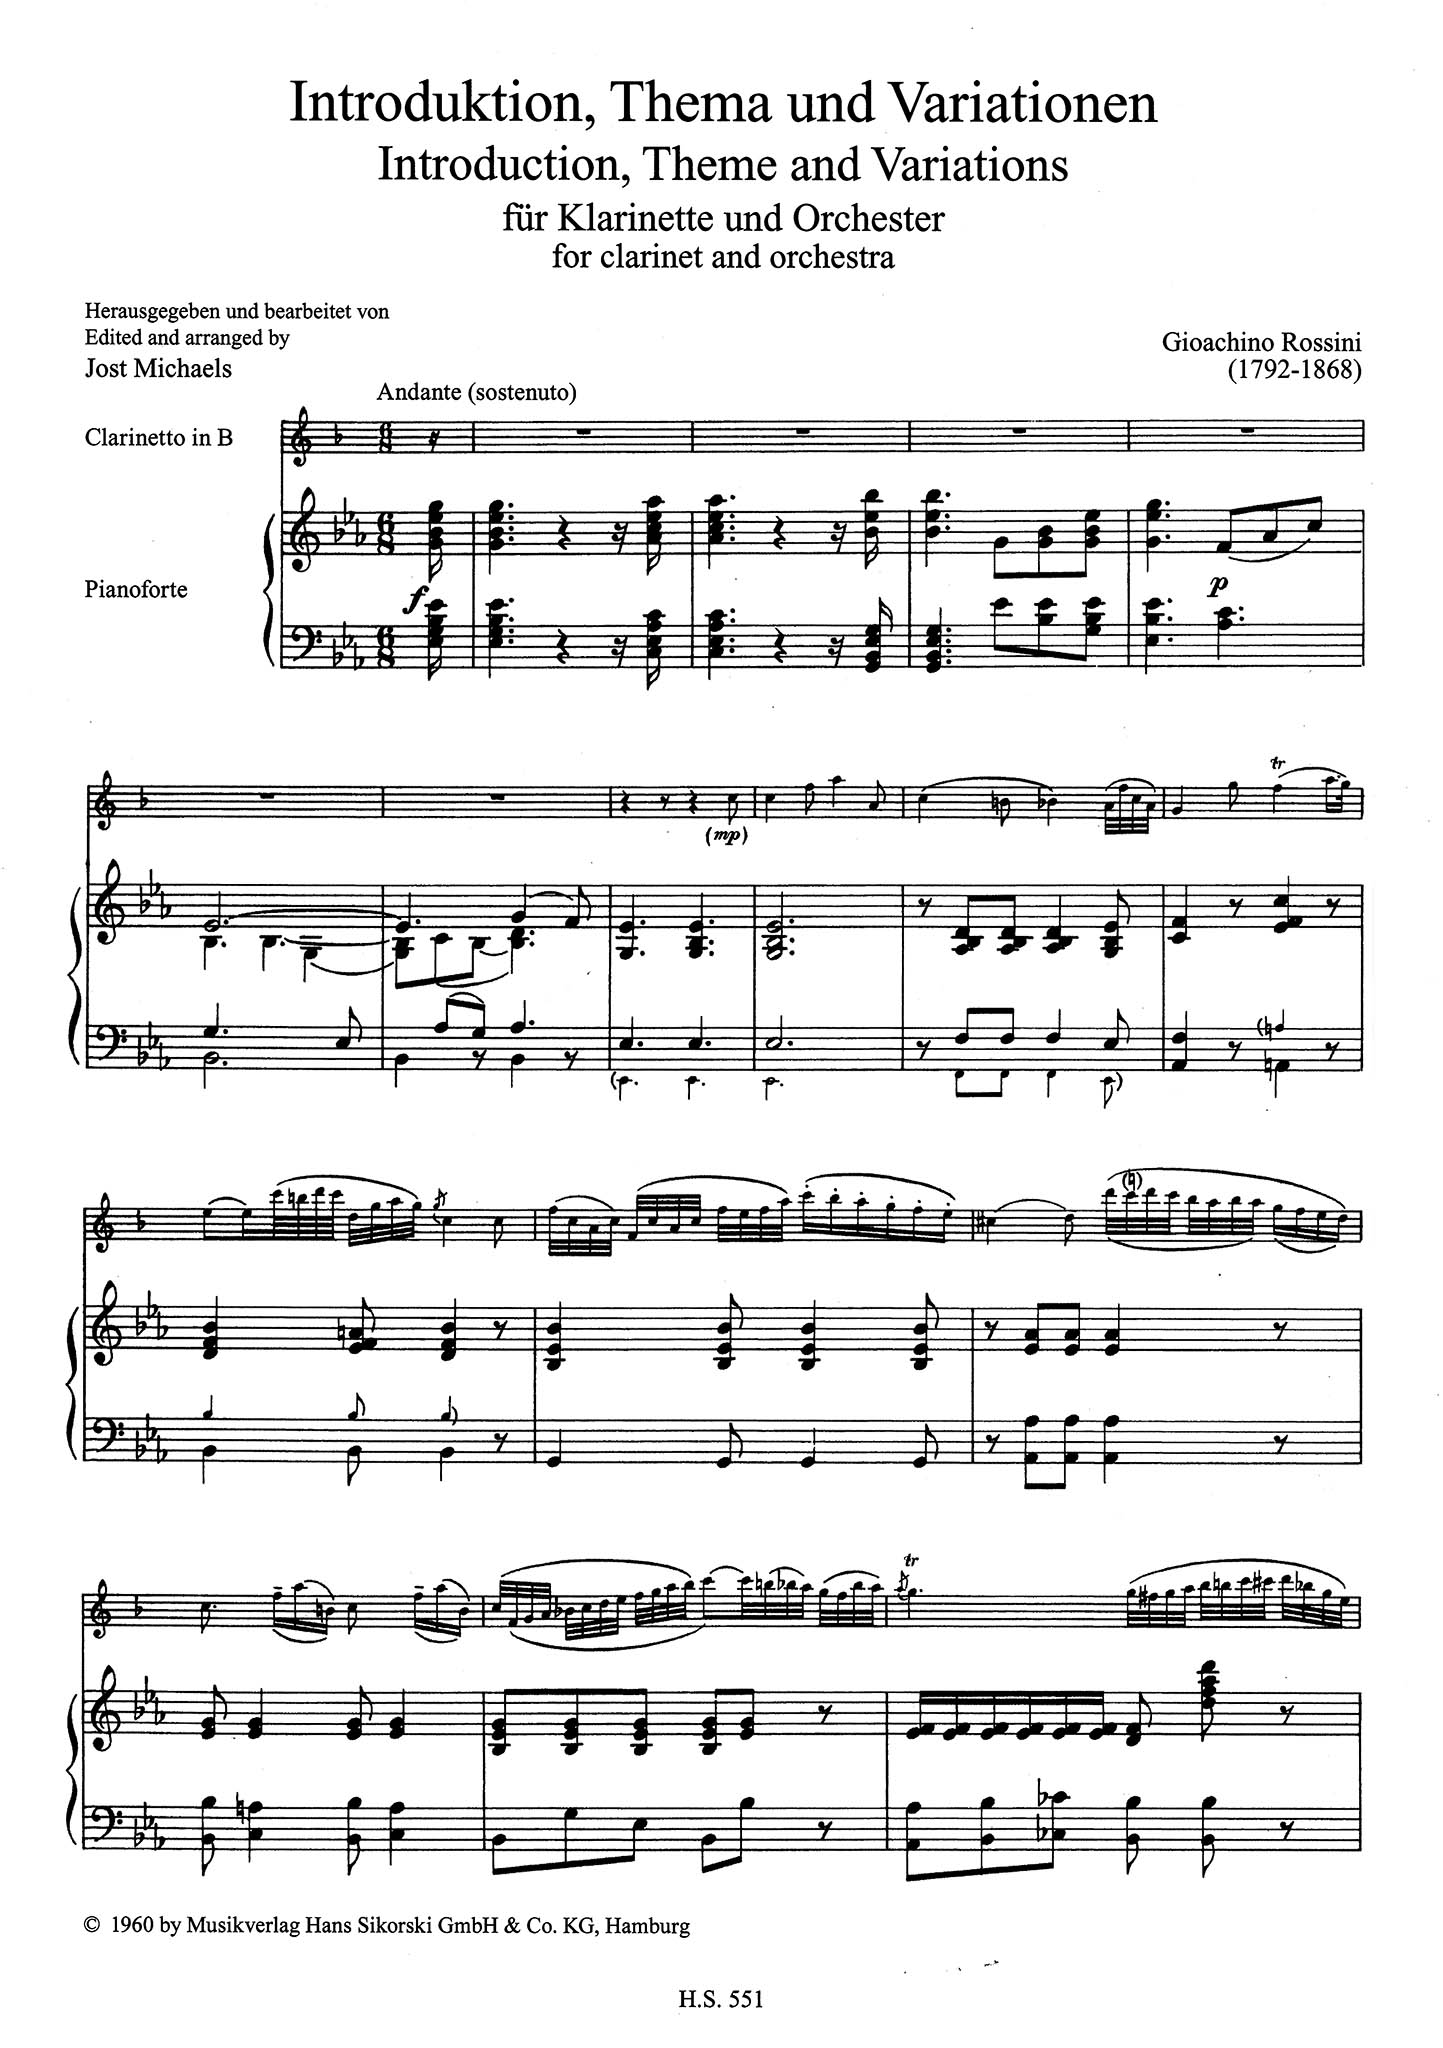 Introduction, Theme and Variations - Score